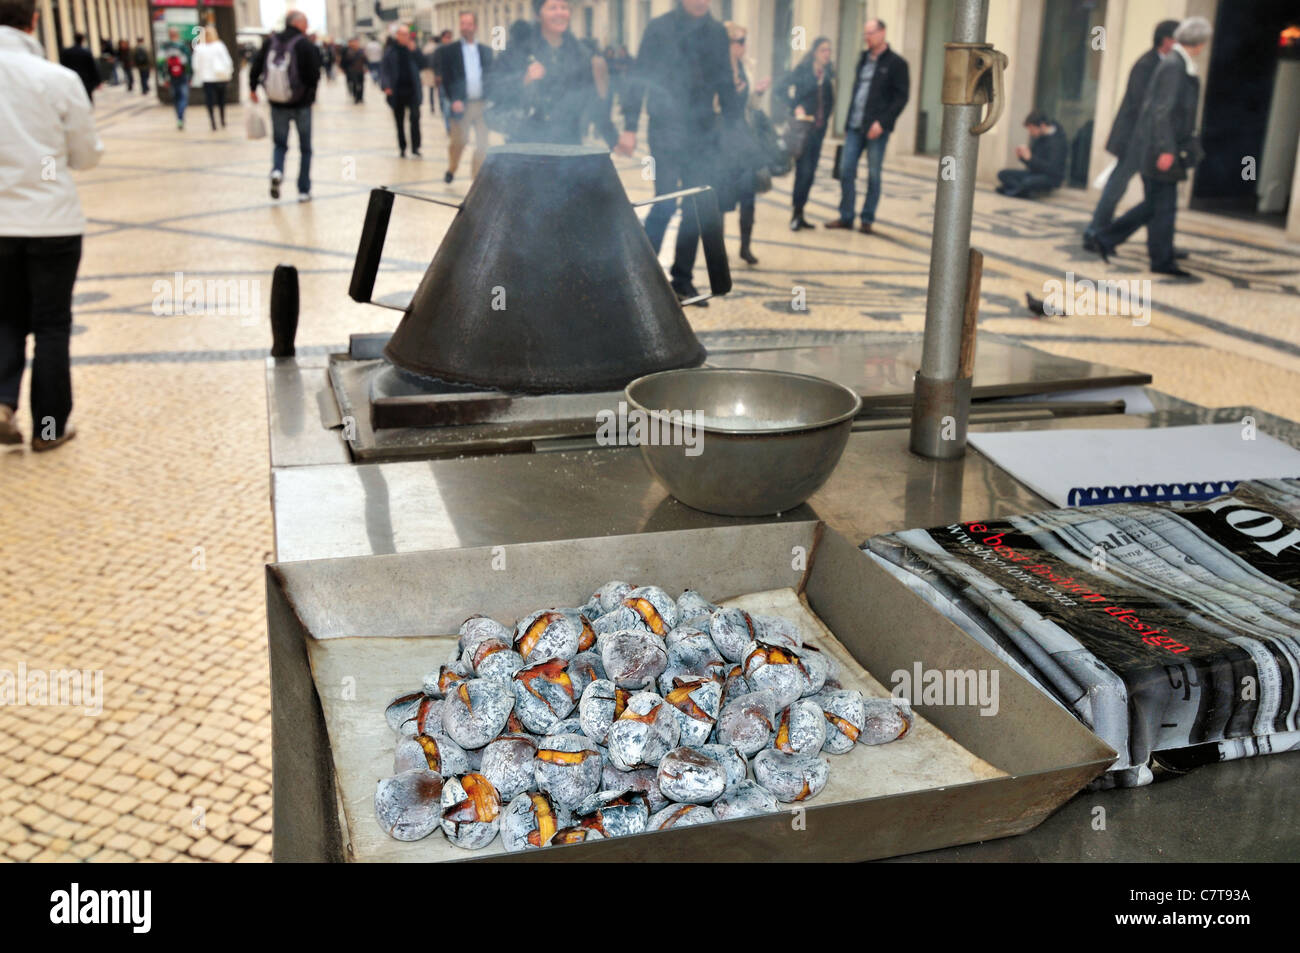 Portugal, Lisbon: Stand with roasted chestnuts in the shopping mall Rua Augusta Stock Photo